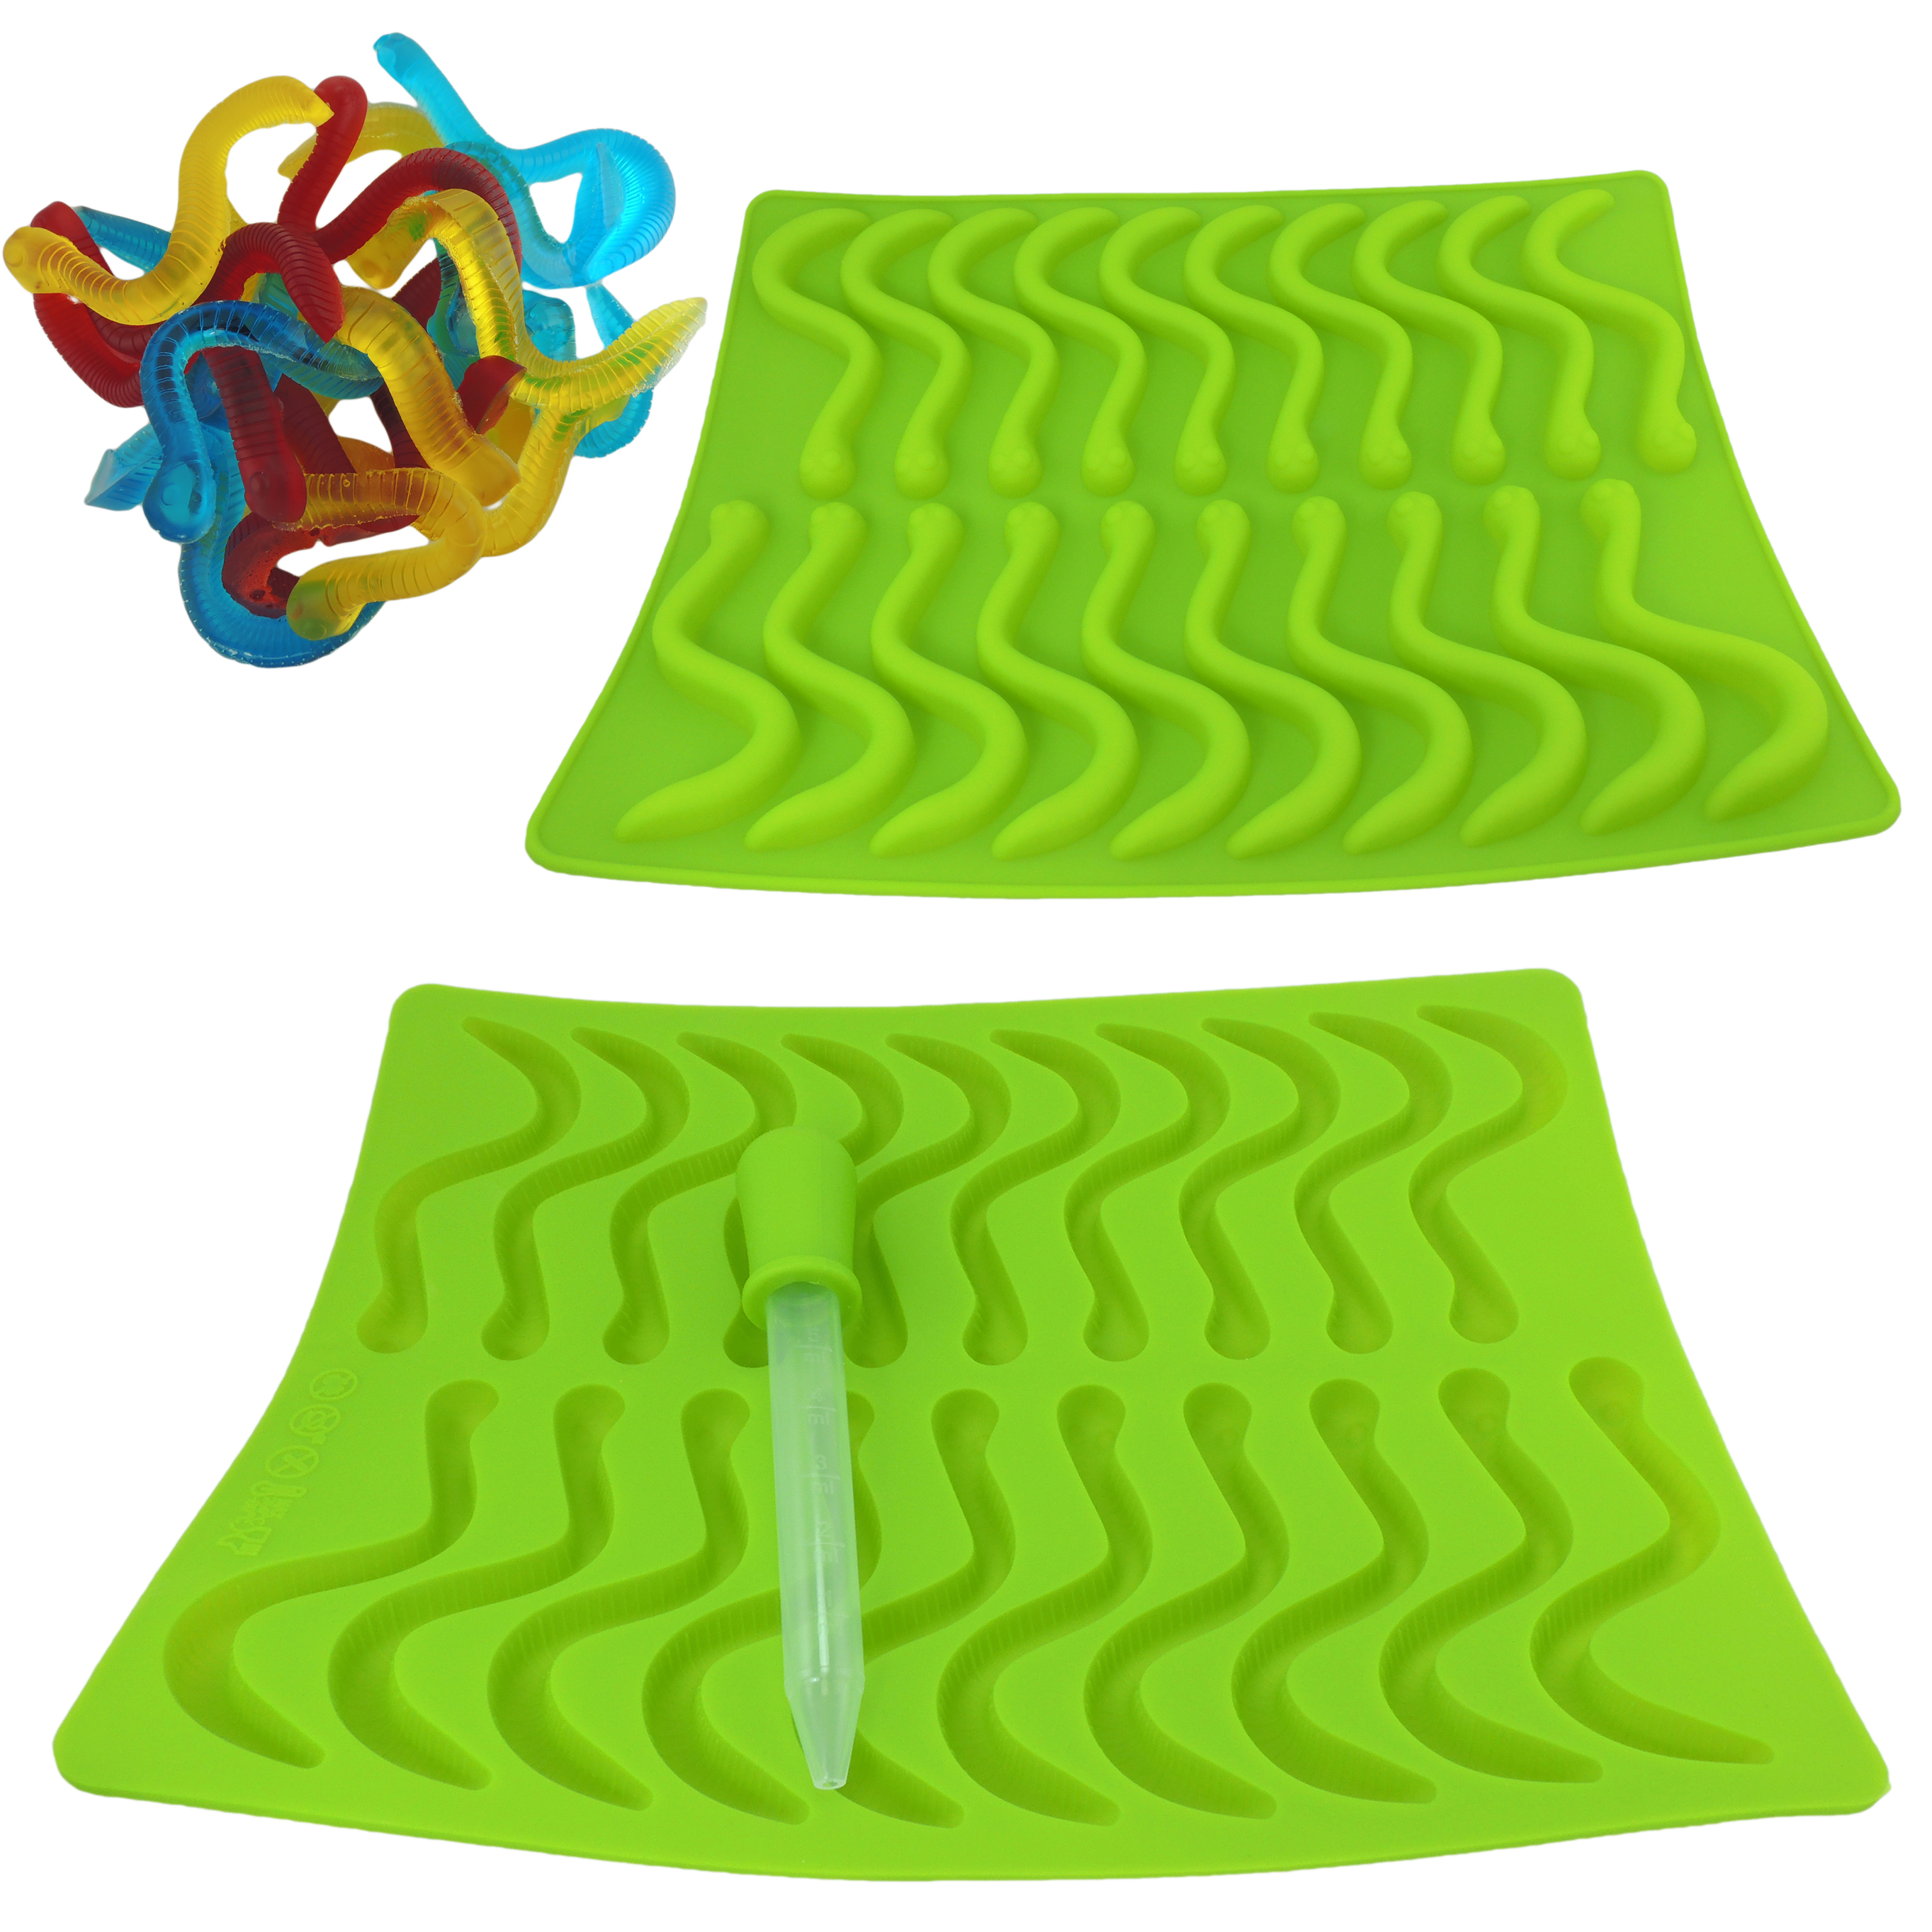 Gummy Worms Mold Maker Homemade Gummies Candy Making Kids Snacks Worm Molds Tray - image 5 of 5